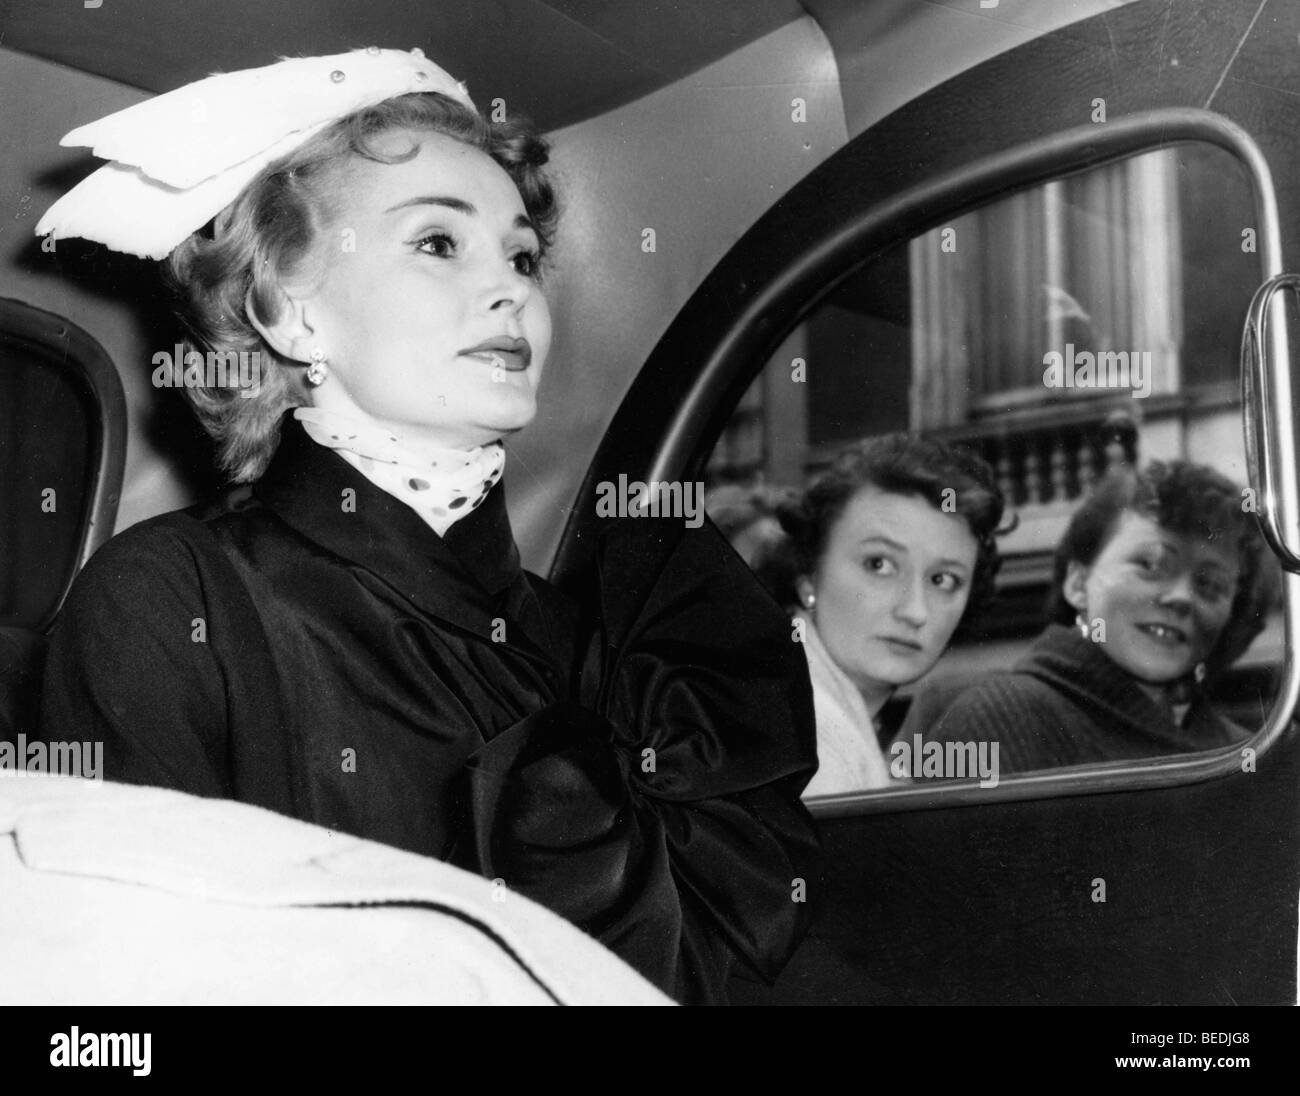 People the street through a window ZSA GABOR while she rides in a car Stock Photo - Alamy